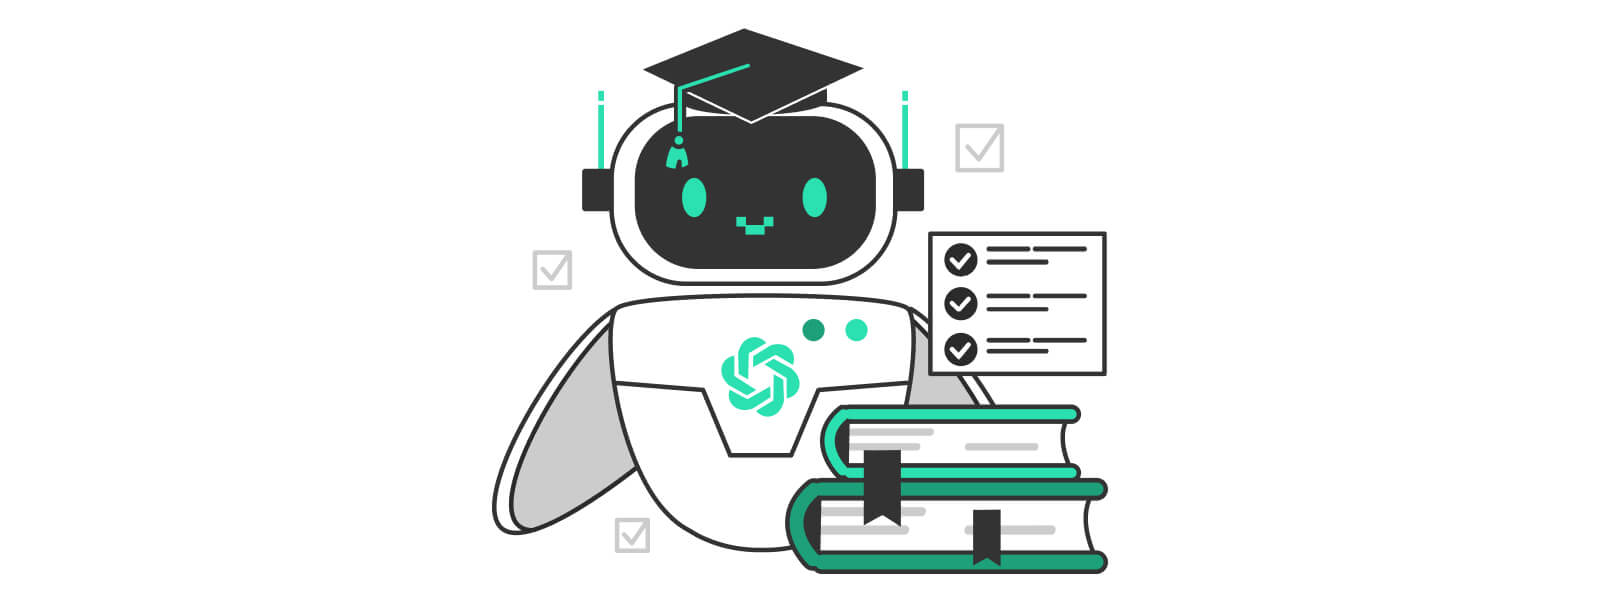 roles of chatbot in education